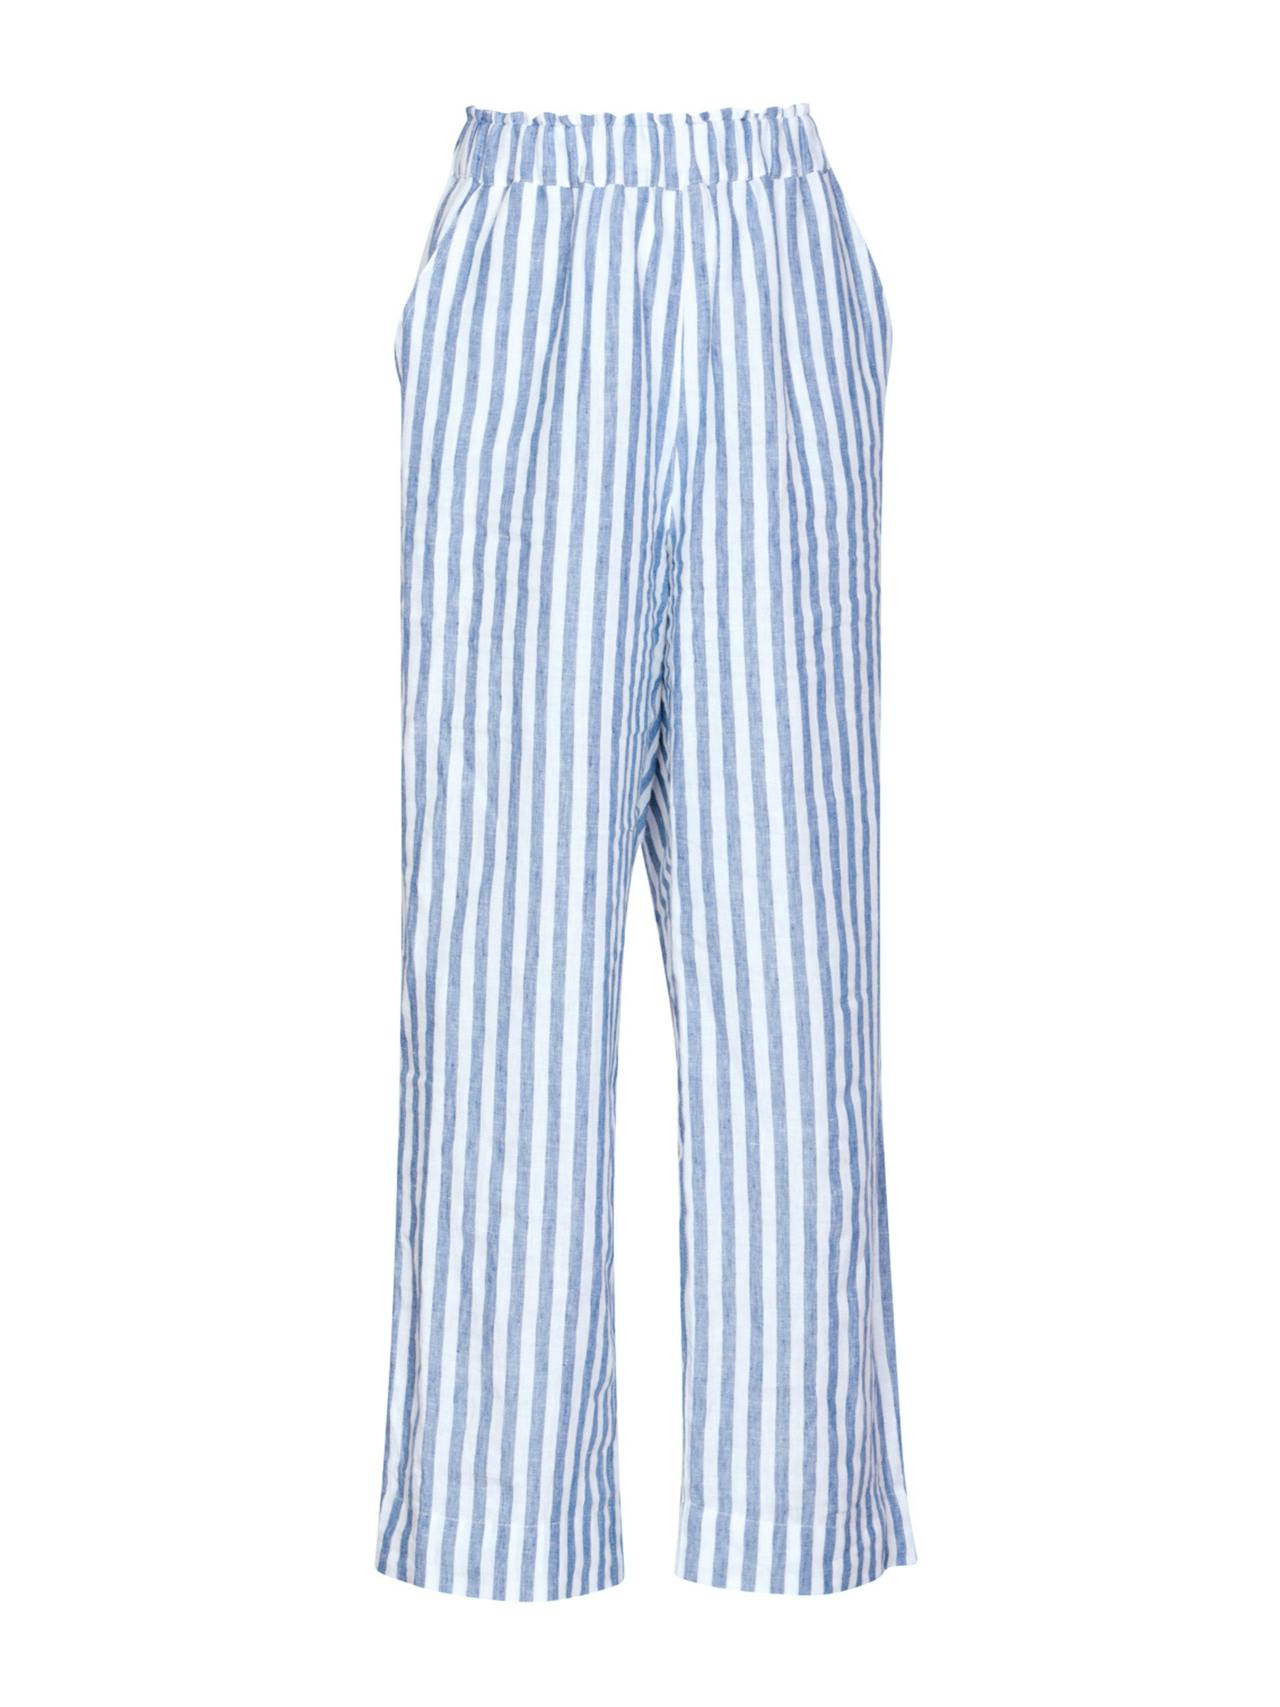 Striped Palermo trousers